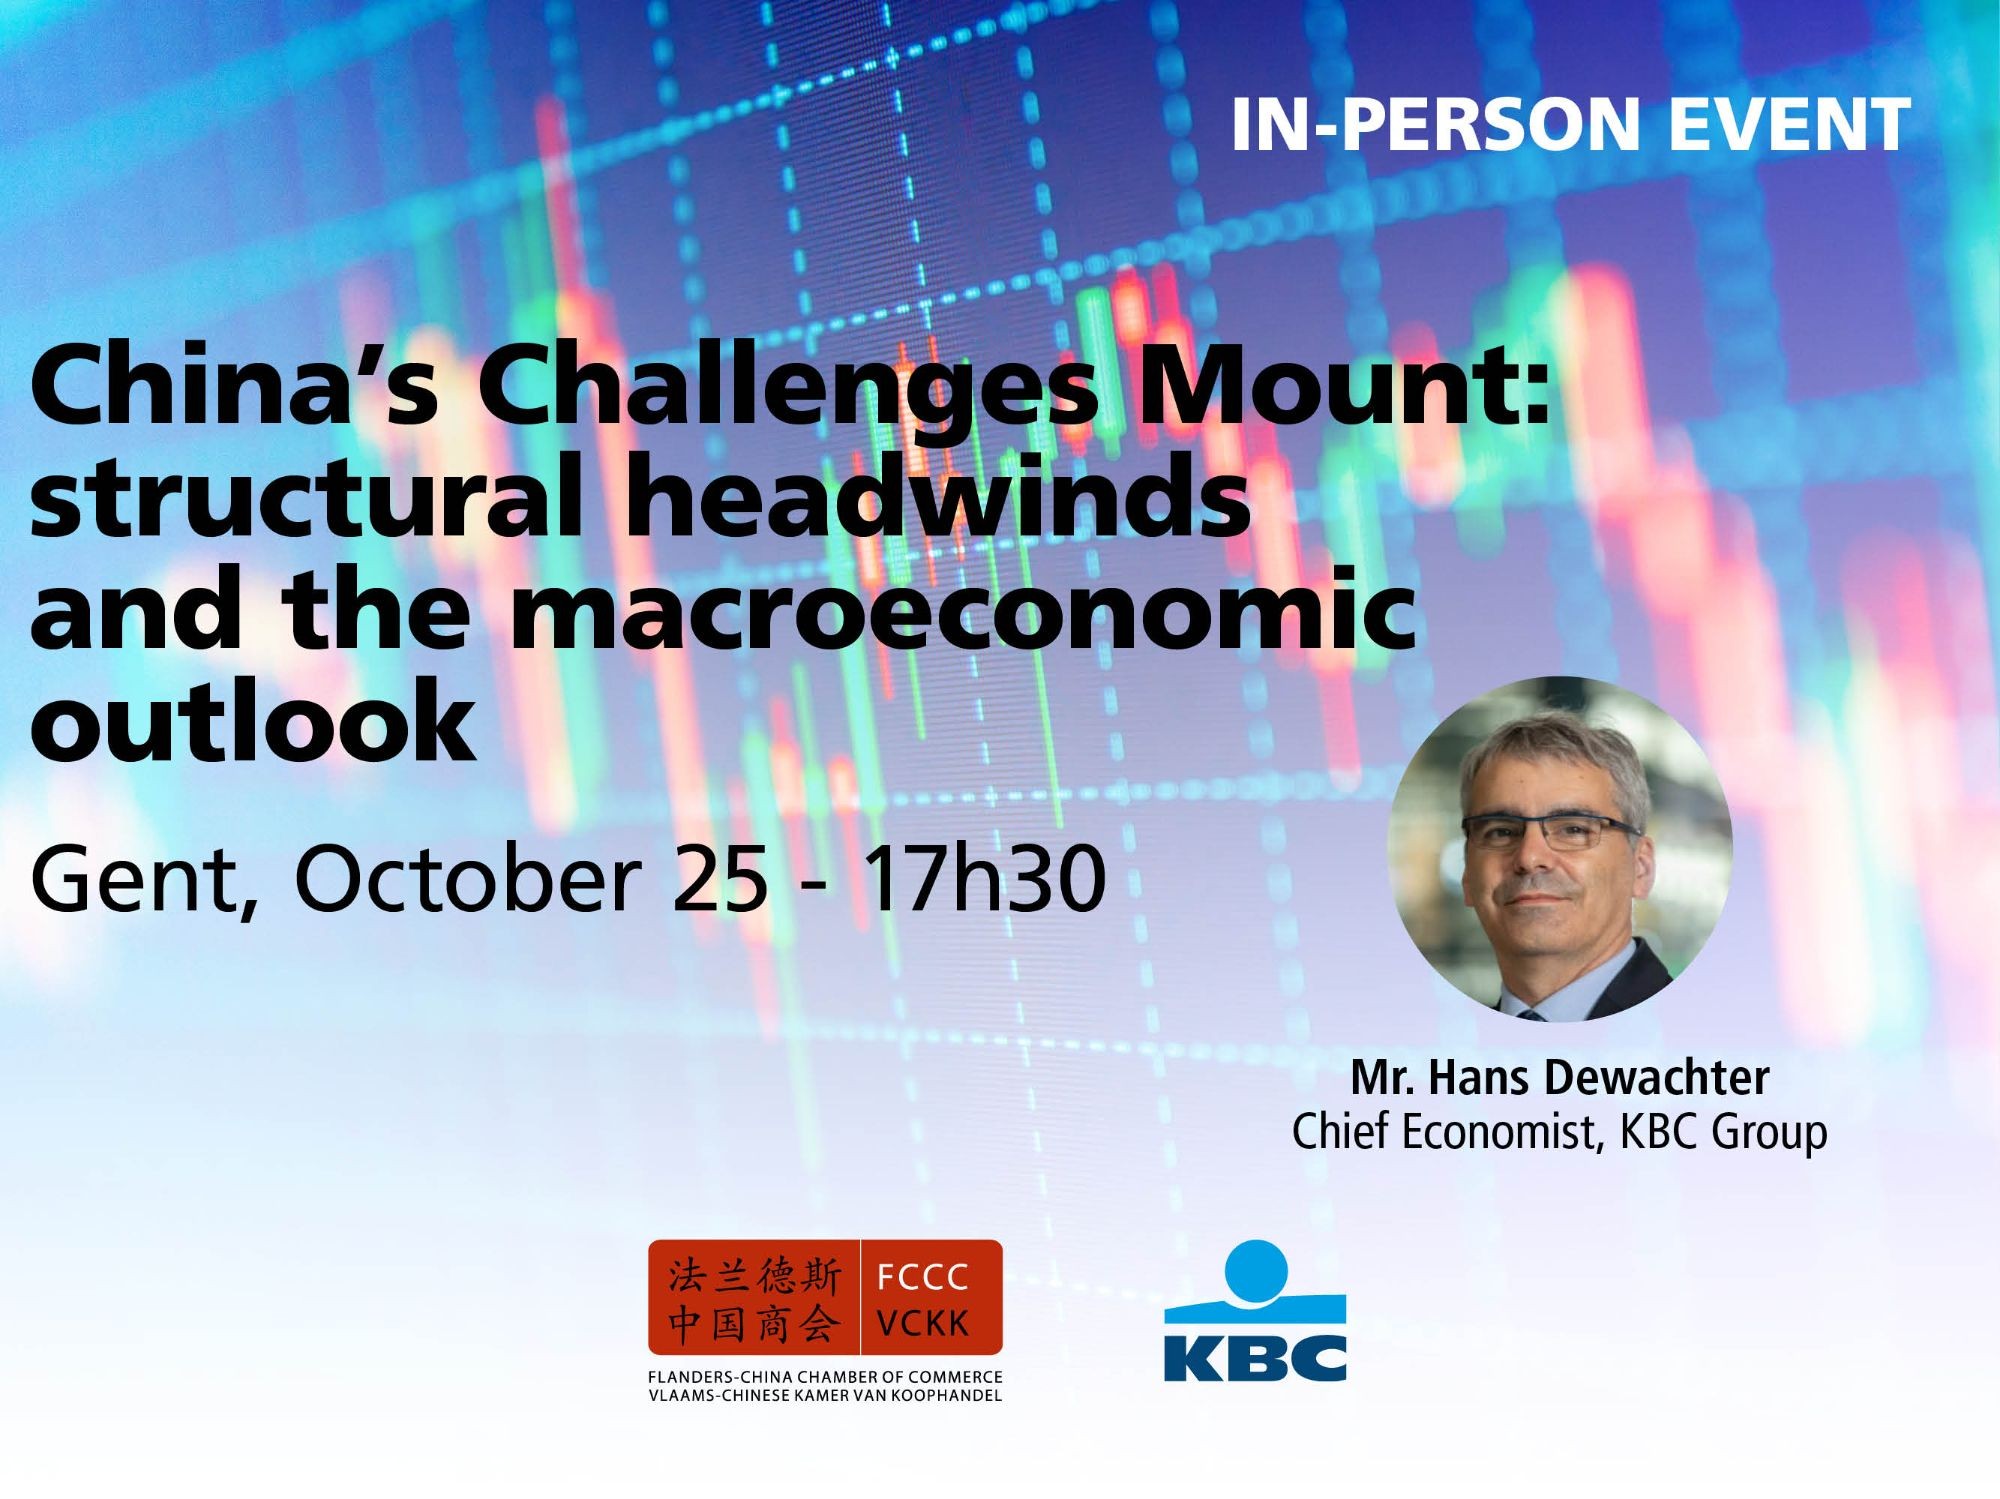 In-person event: China’s Challenges Mount: structural headwinds and the macroeconomic outlook - October 25 - 17h30 - Gent